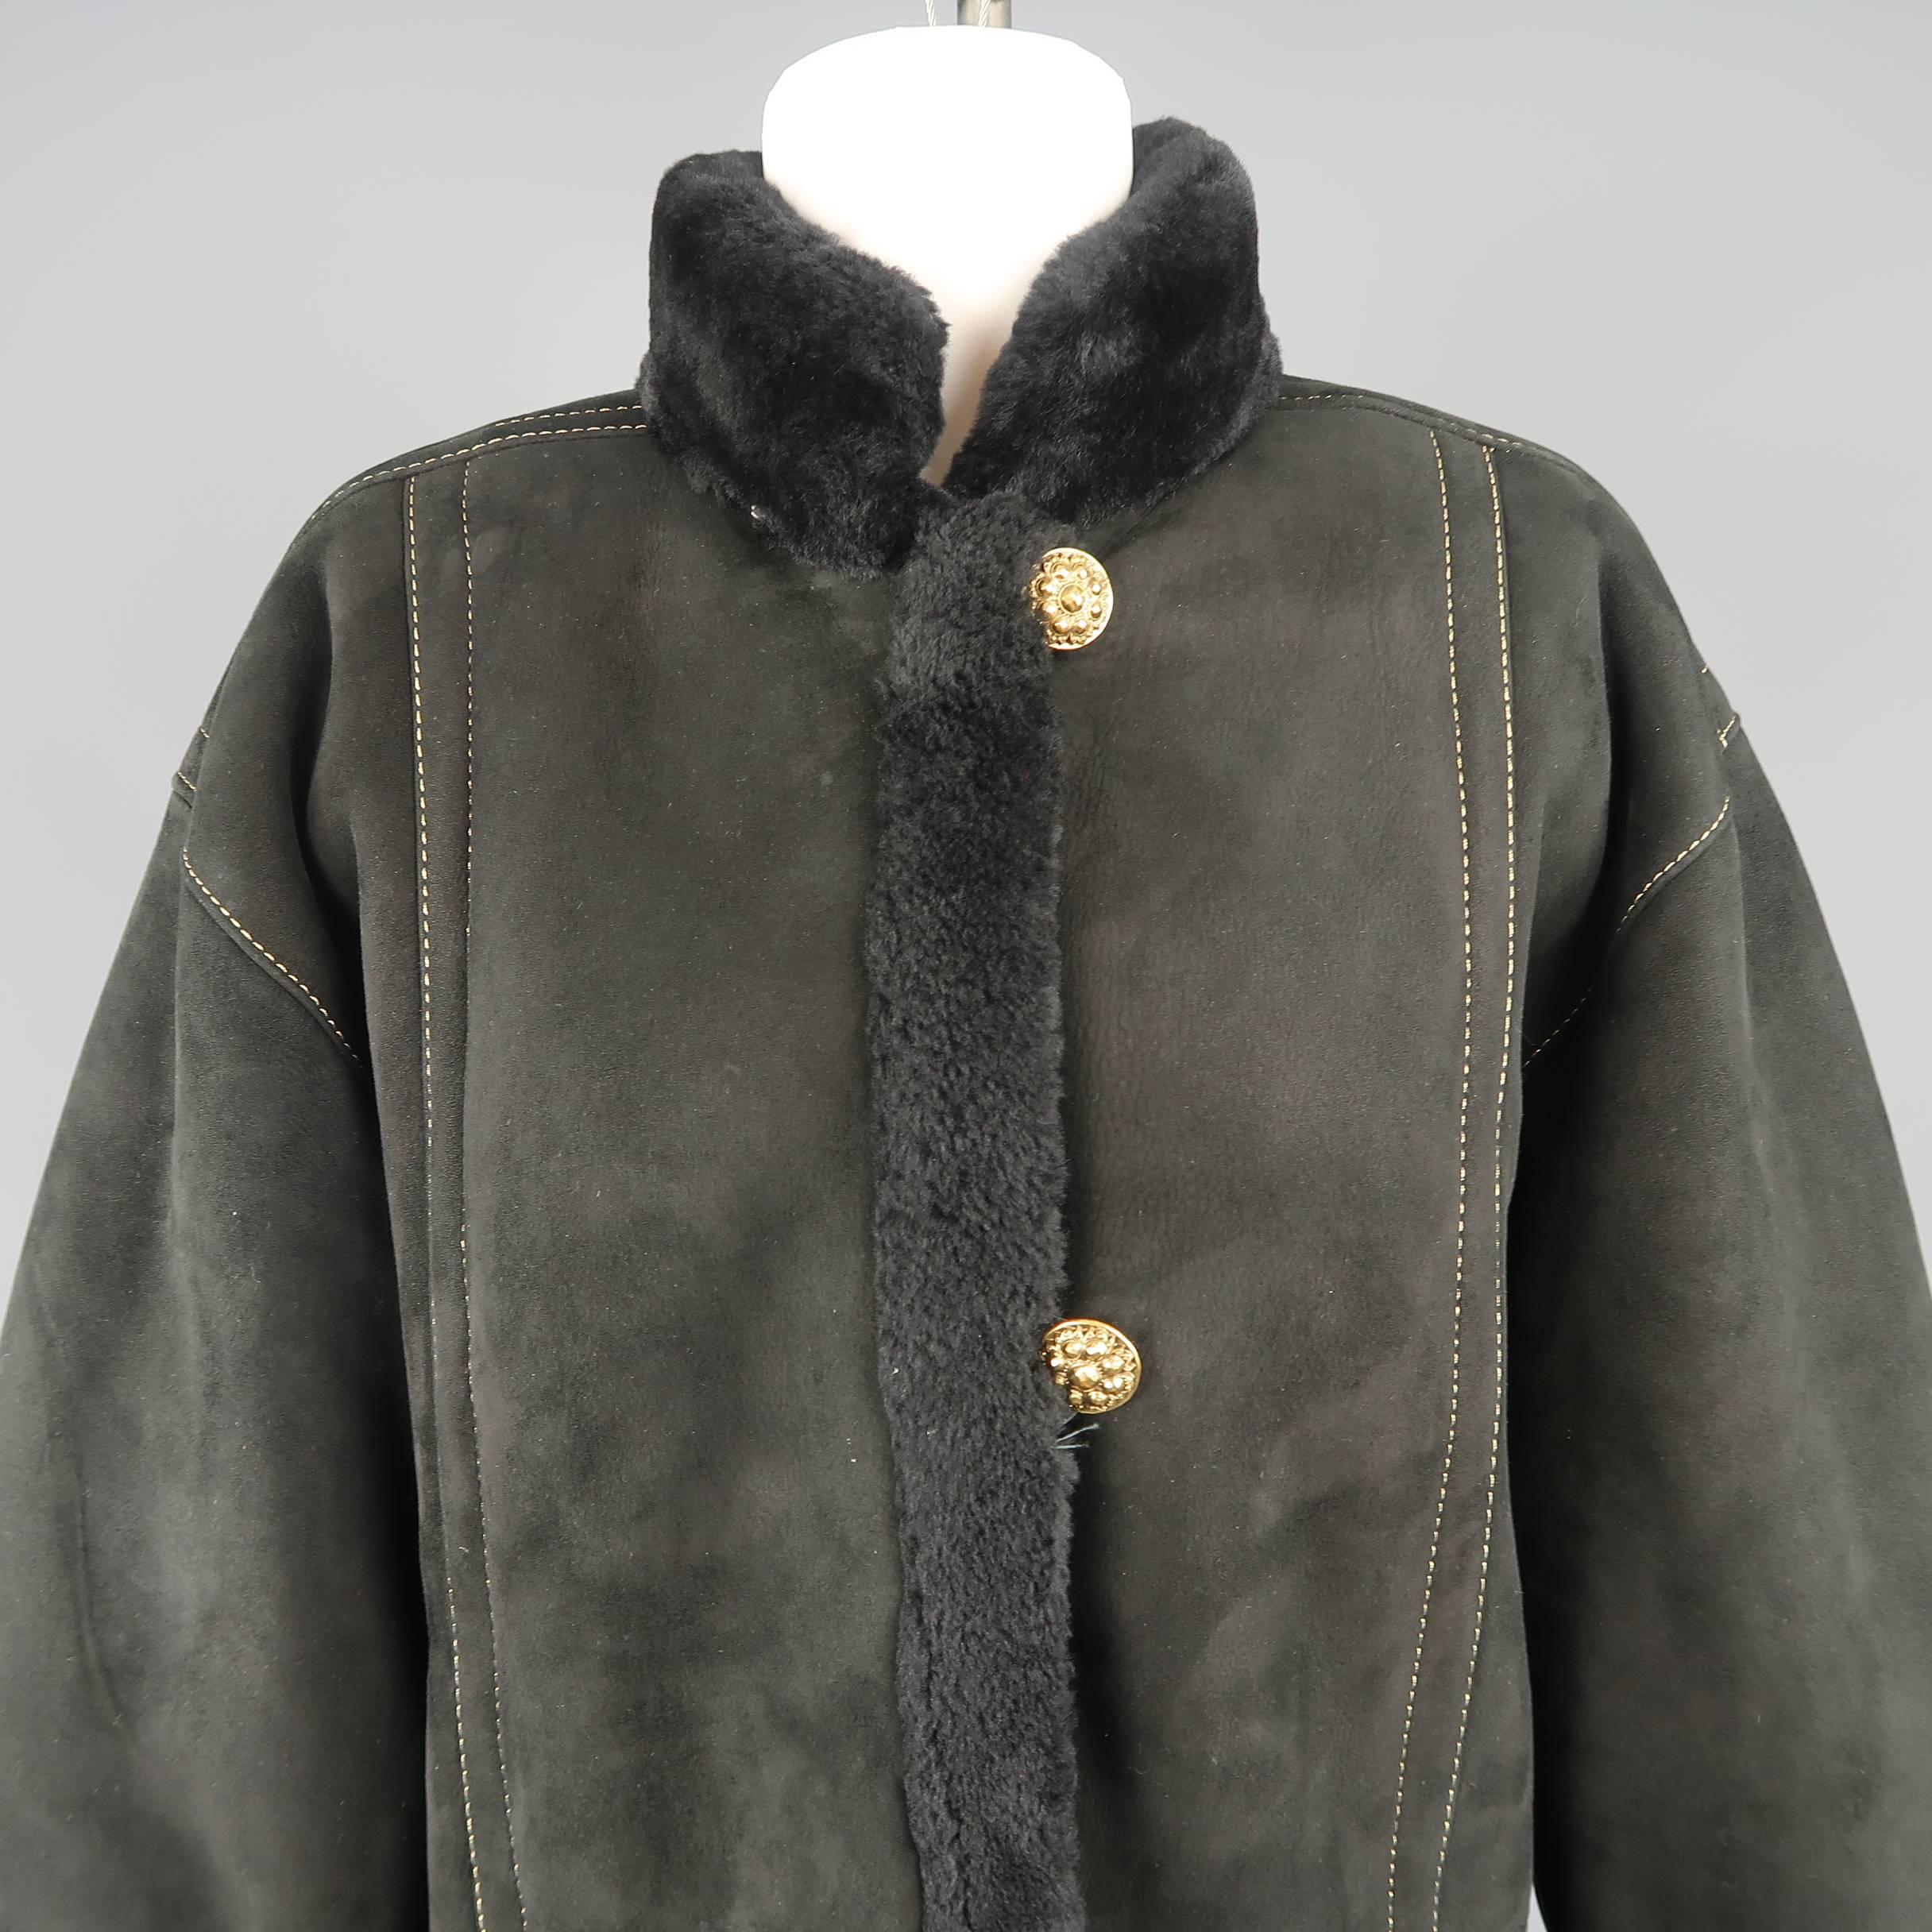 Vintage 1980's YVES SAINT LAURENT Fourrures coat comes black shearling fur lined suede with a high collar, detachable hood, metallic gold contrast stitching, double slit buttoned front, welt pockets, and gold tone engraved buttons. Wear and marks at